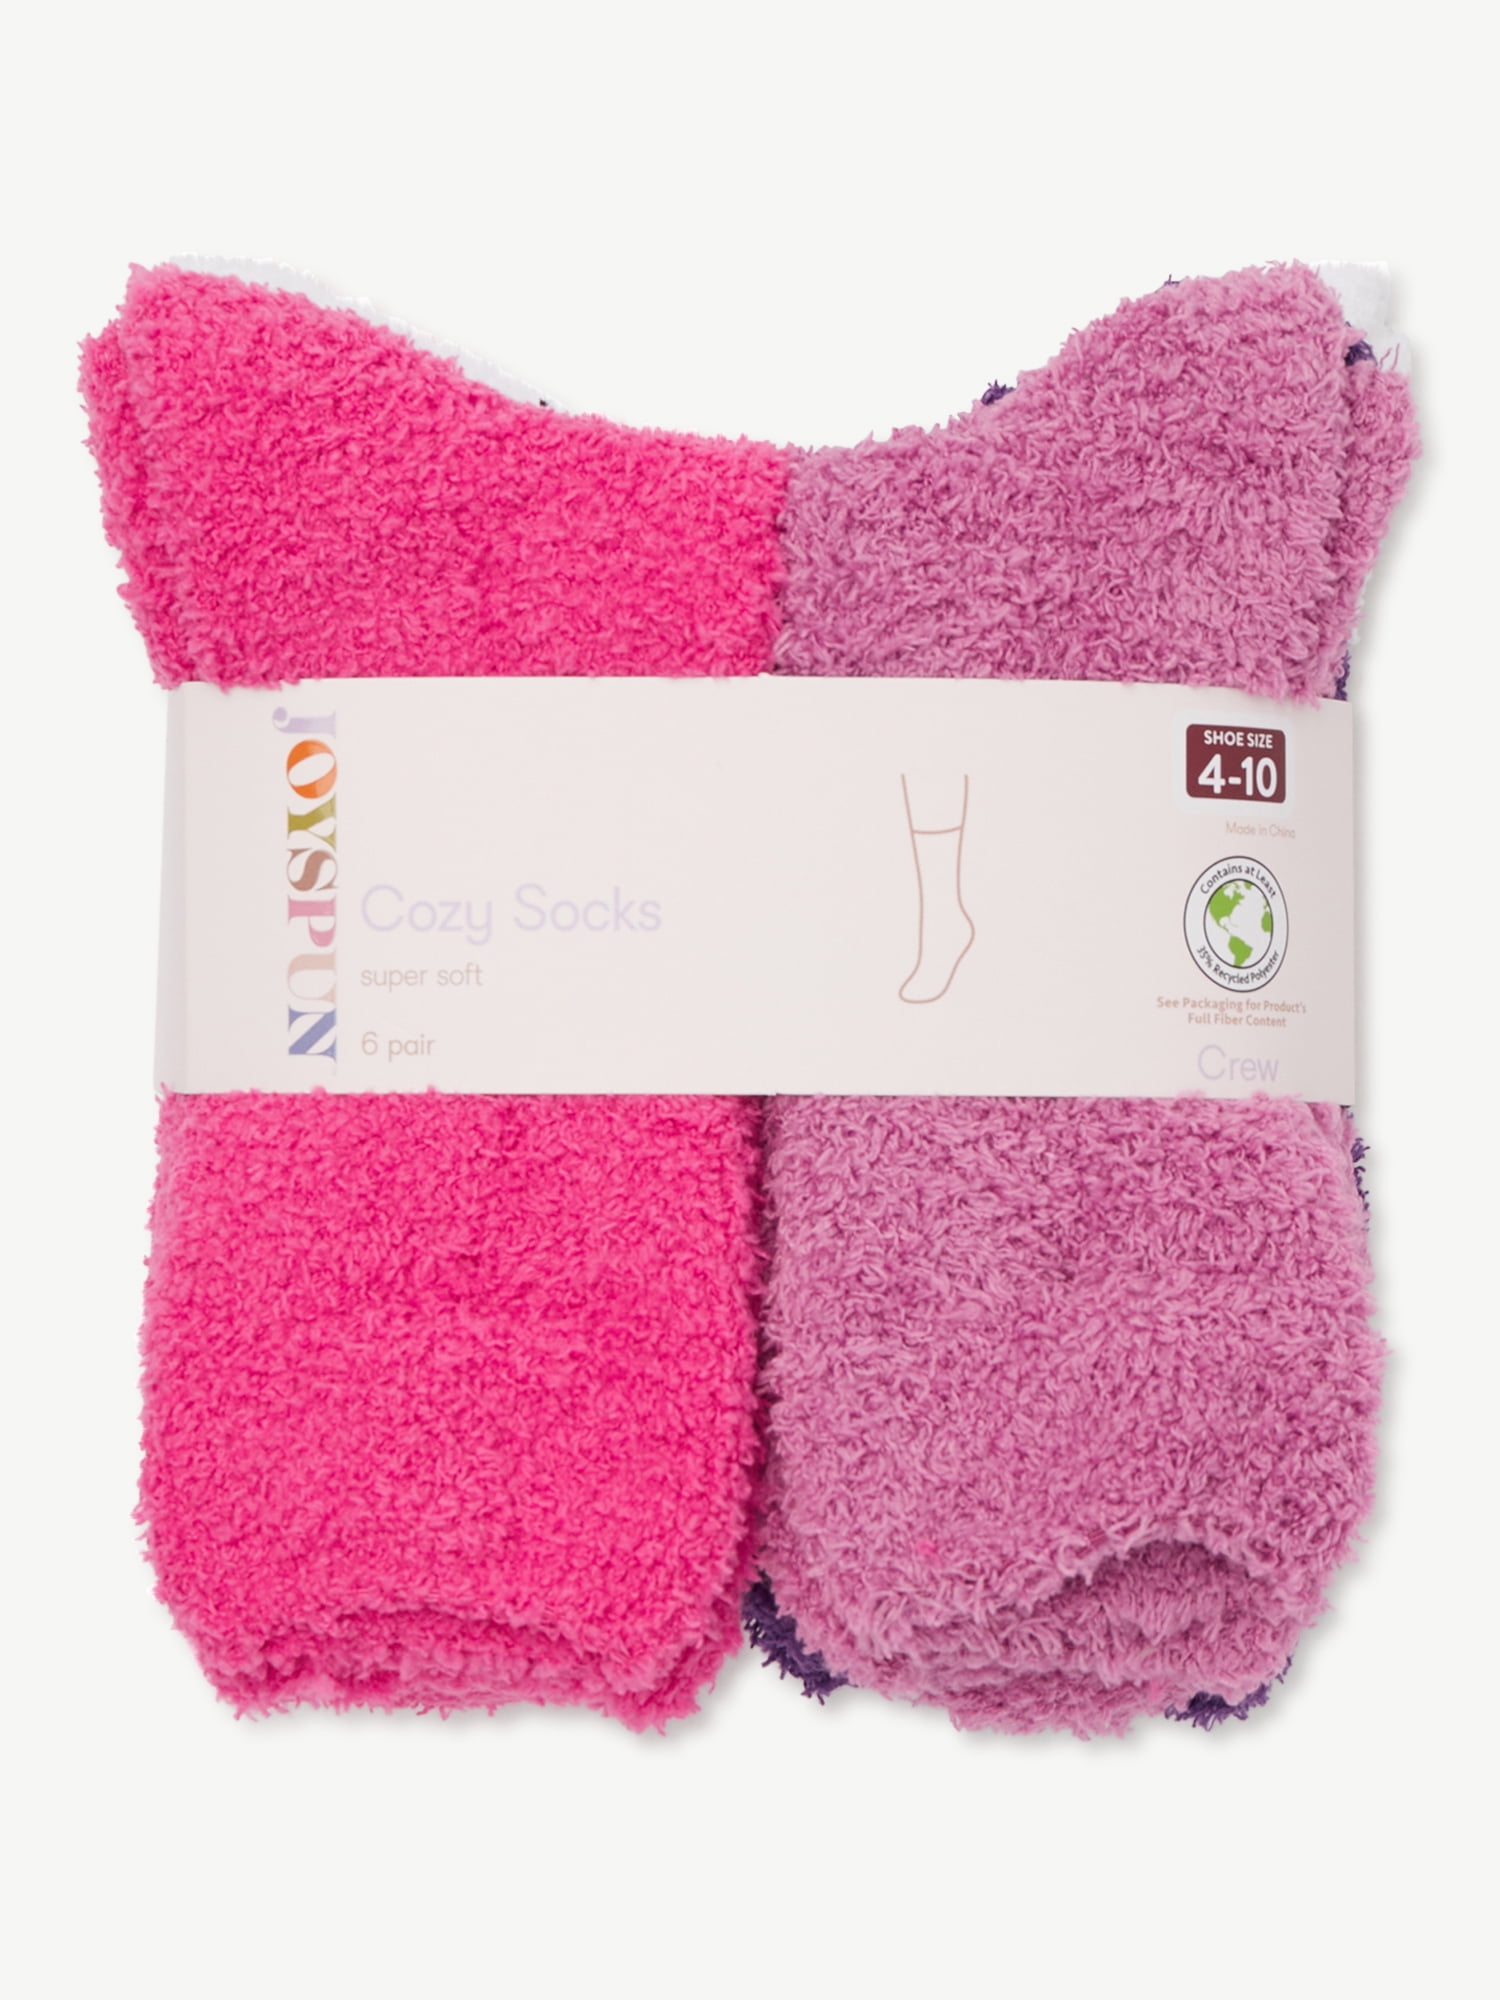 Ladies 6PK Cozy Socks from @roots on sale until September 26th